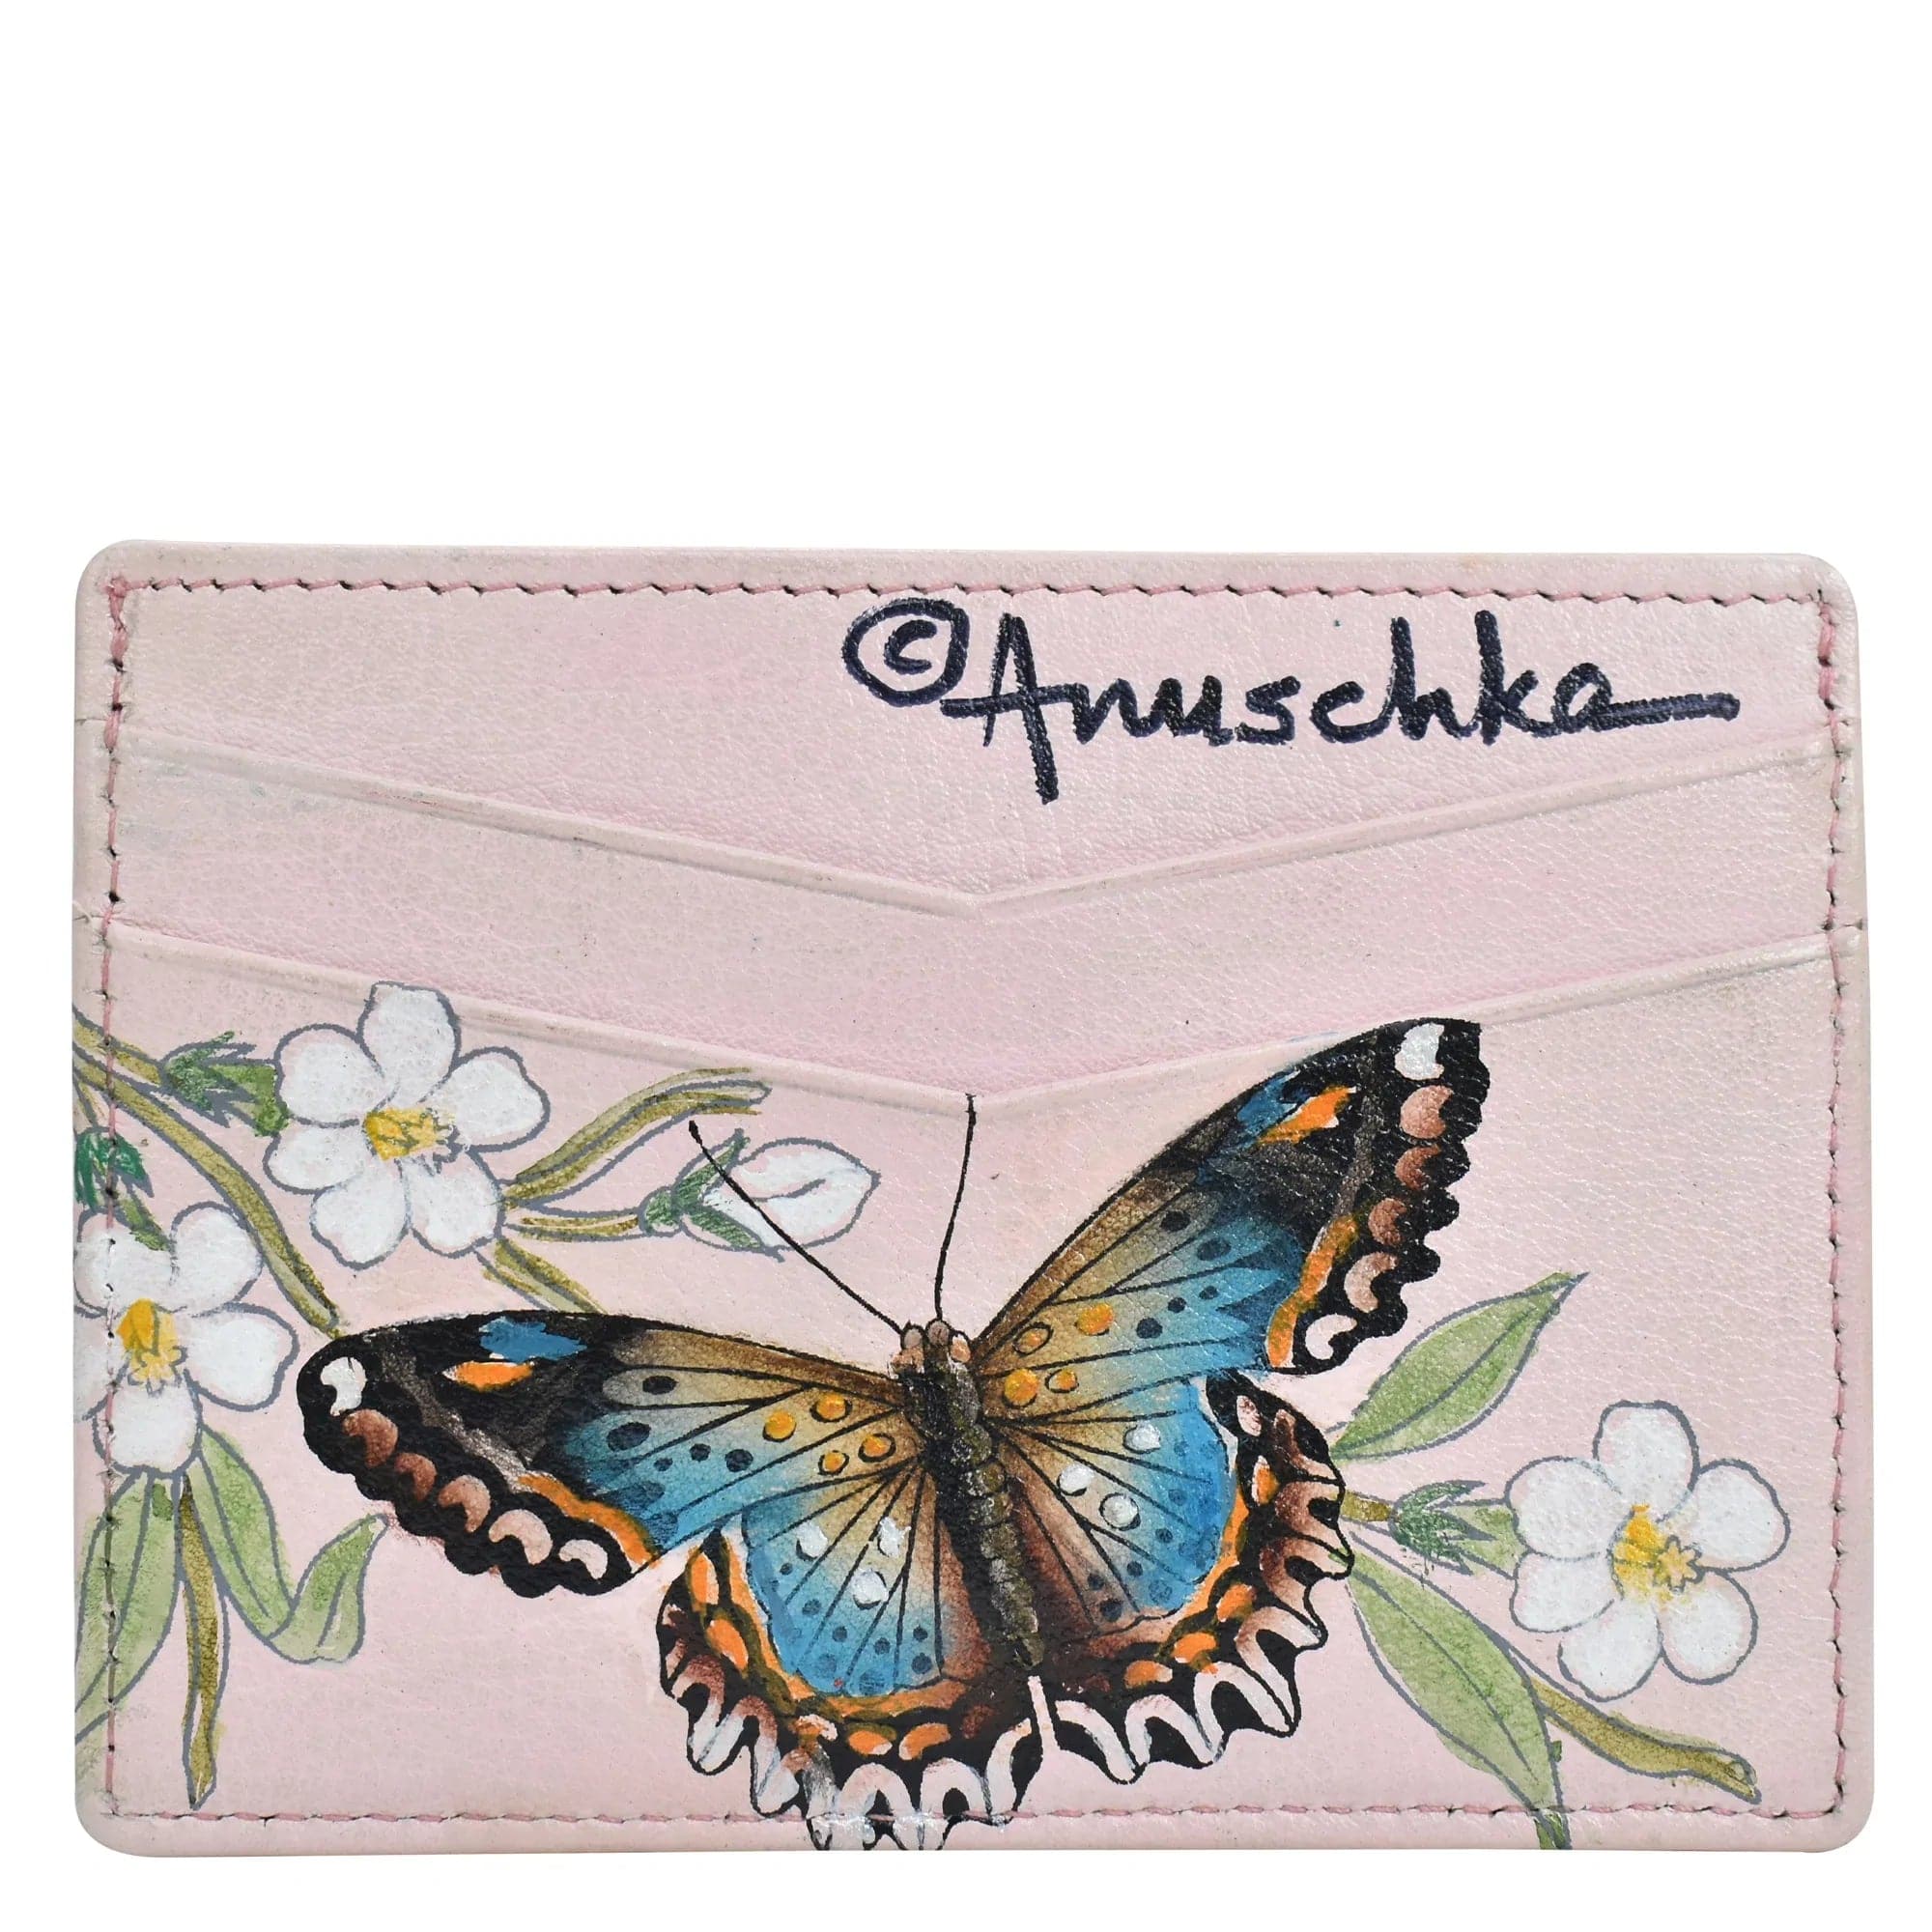 Anuschka Butterfly Melody Credit Card Case